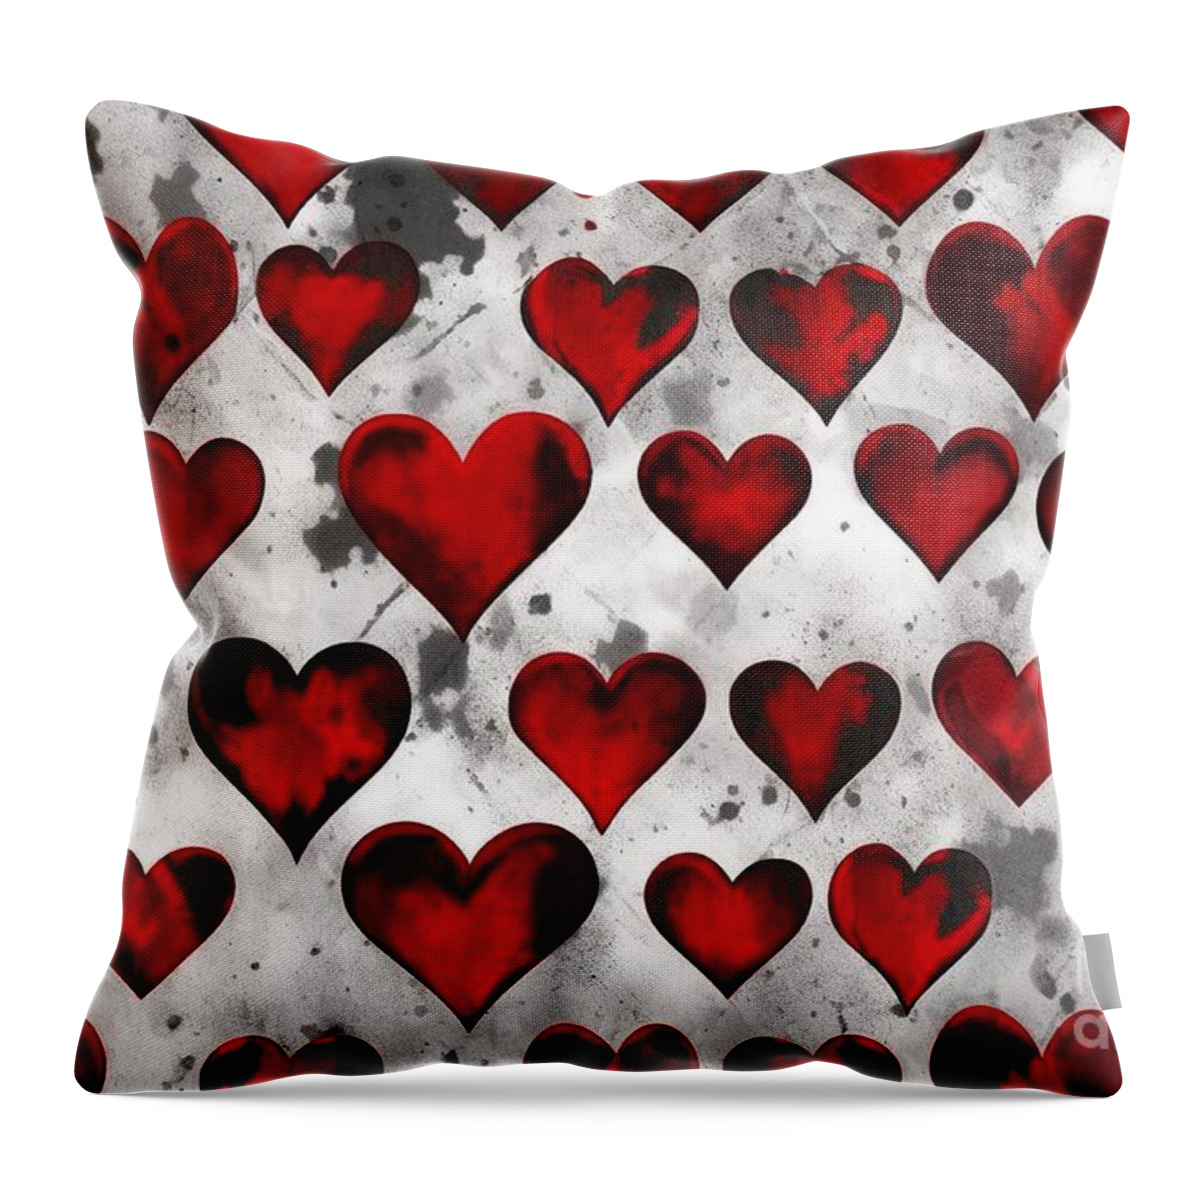 Seamless Throw Pillow featuring the painting Seamless Hearts Playing Card Suit Pattern Painted With Black White And Red Paint Tileable Grunge Hand Drawn Valentines Day Wallpaper Love Design Motif Gaming Gambling Or Poker Background Texture by N Akkash